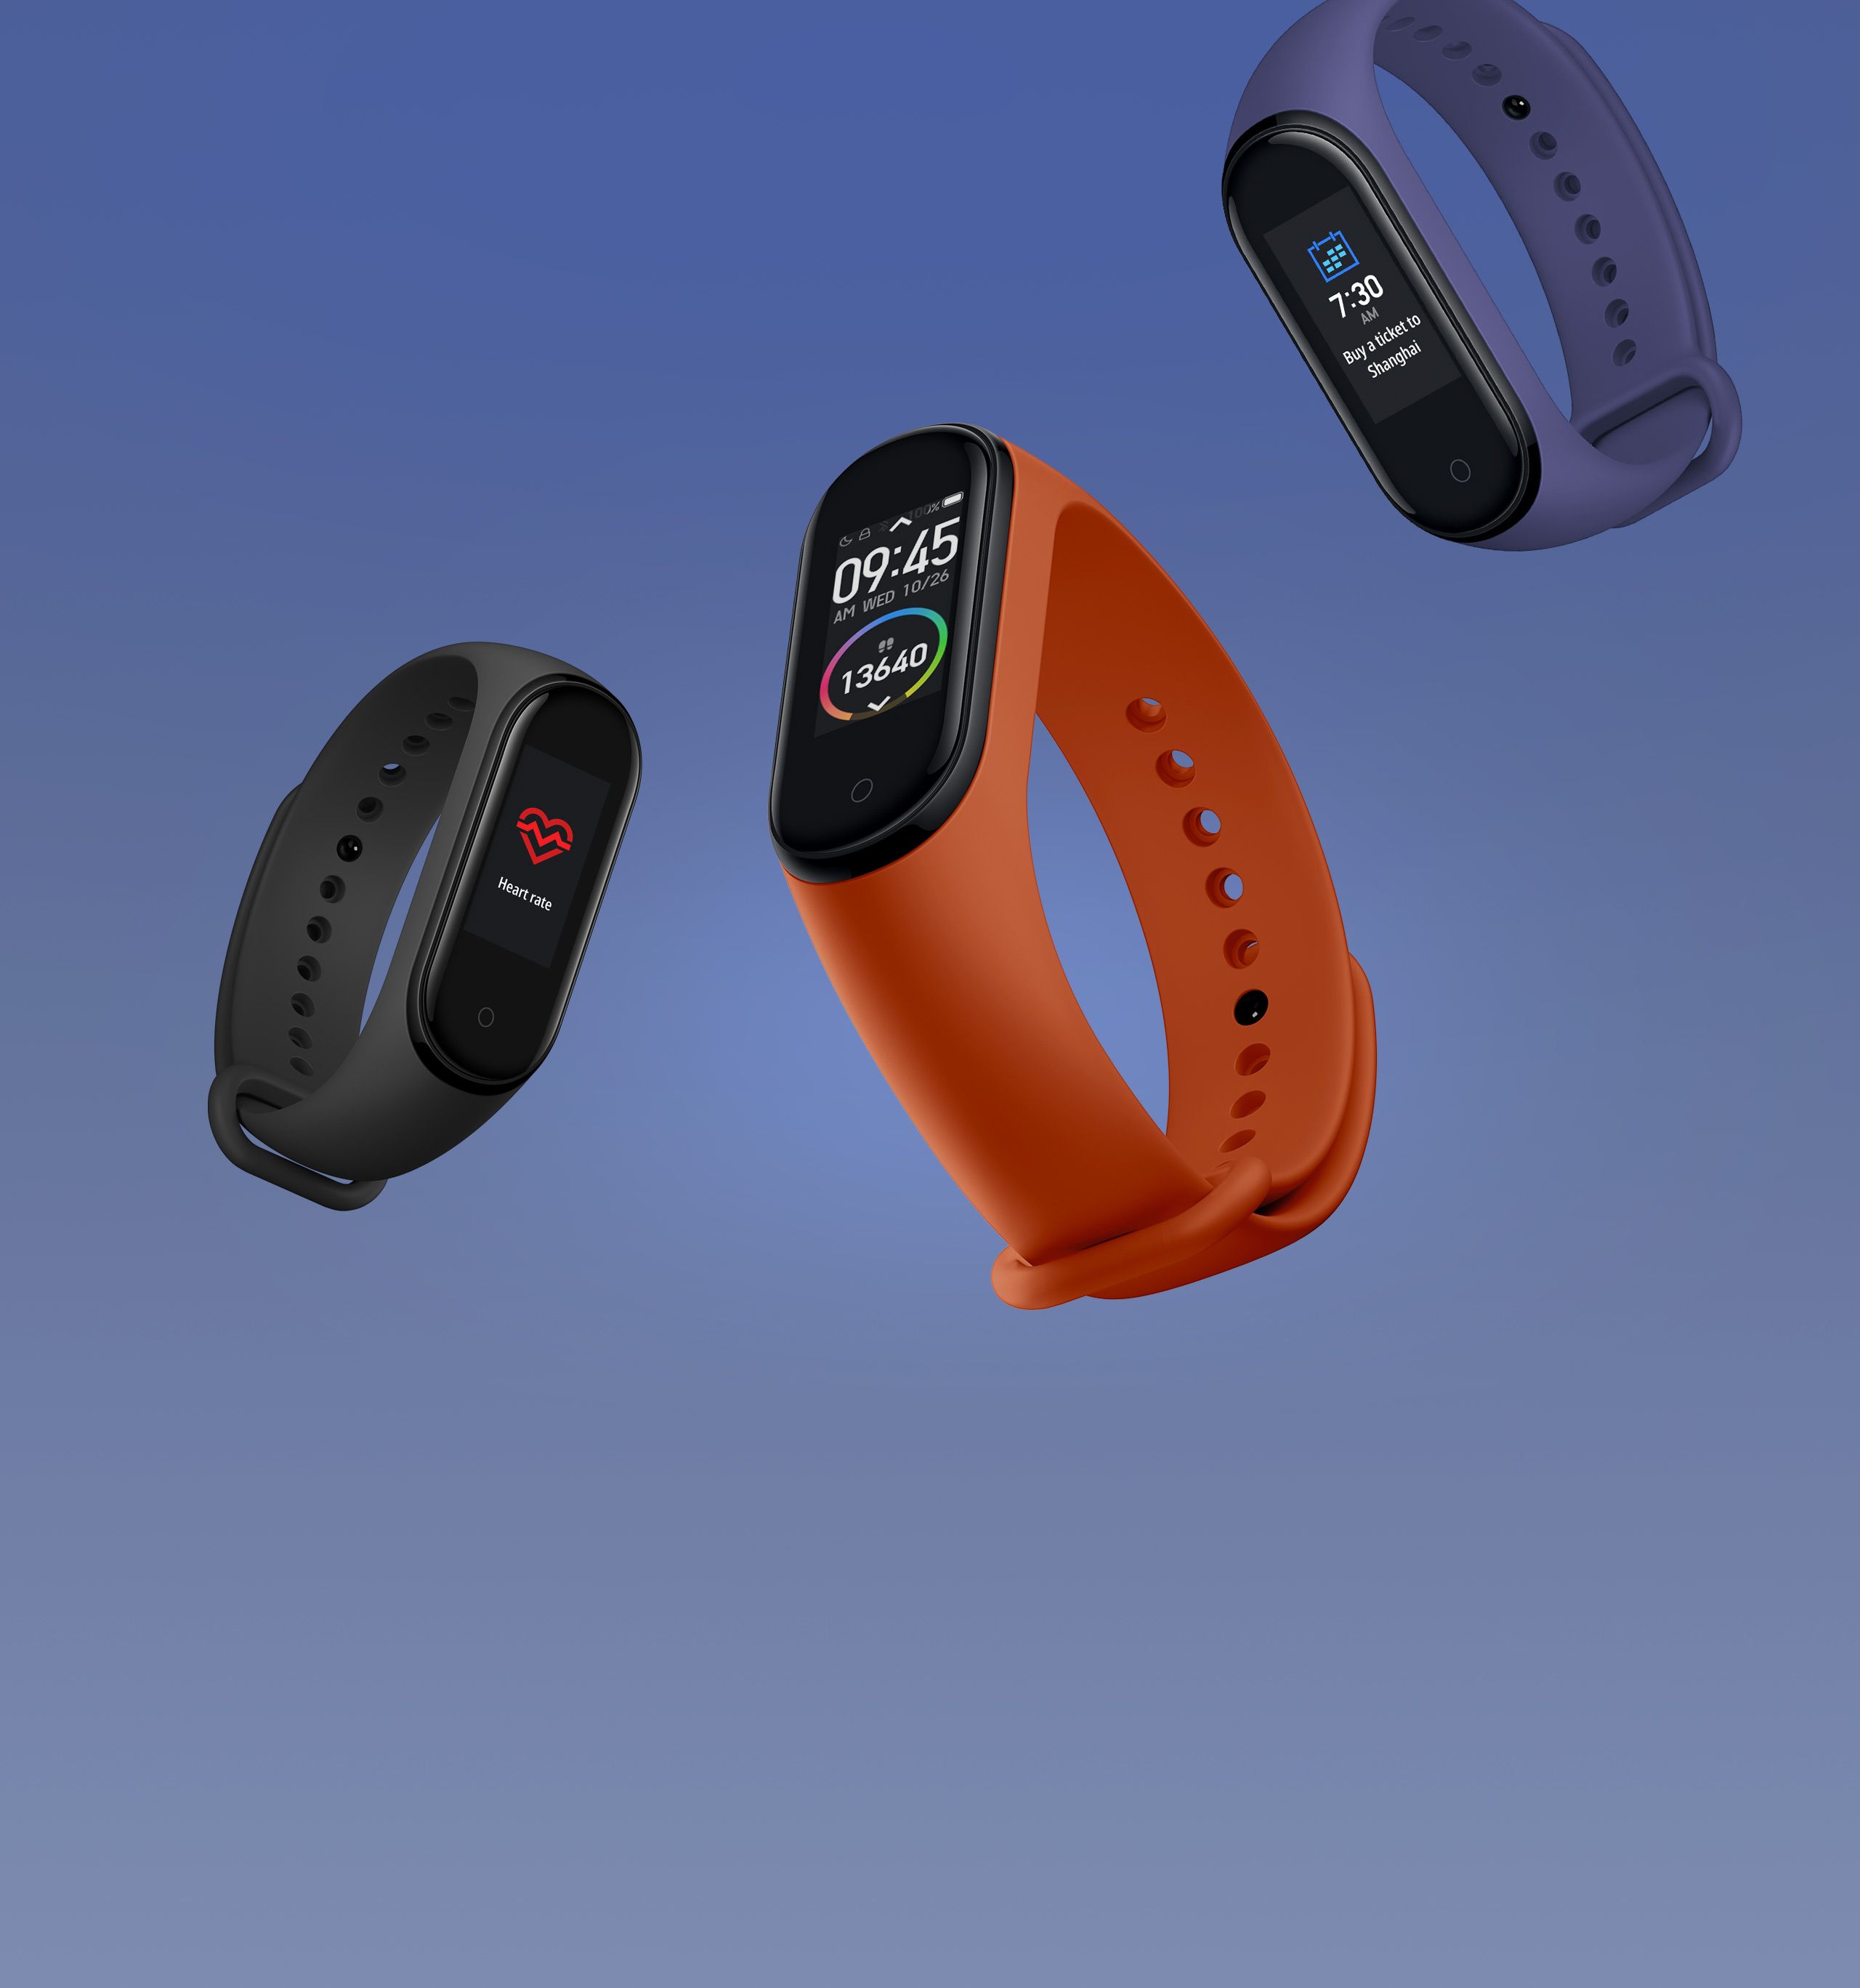 Xiaomi Mi Band 4 in a range of colors